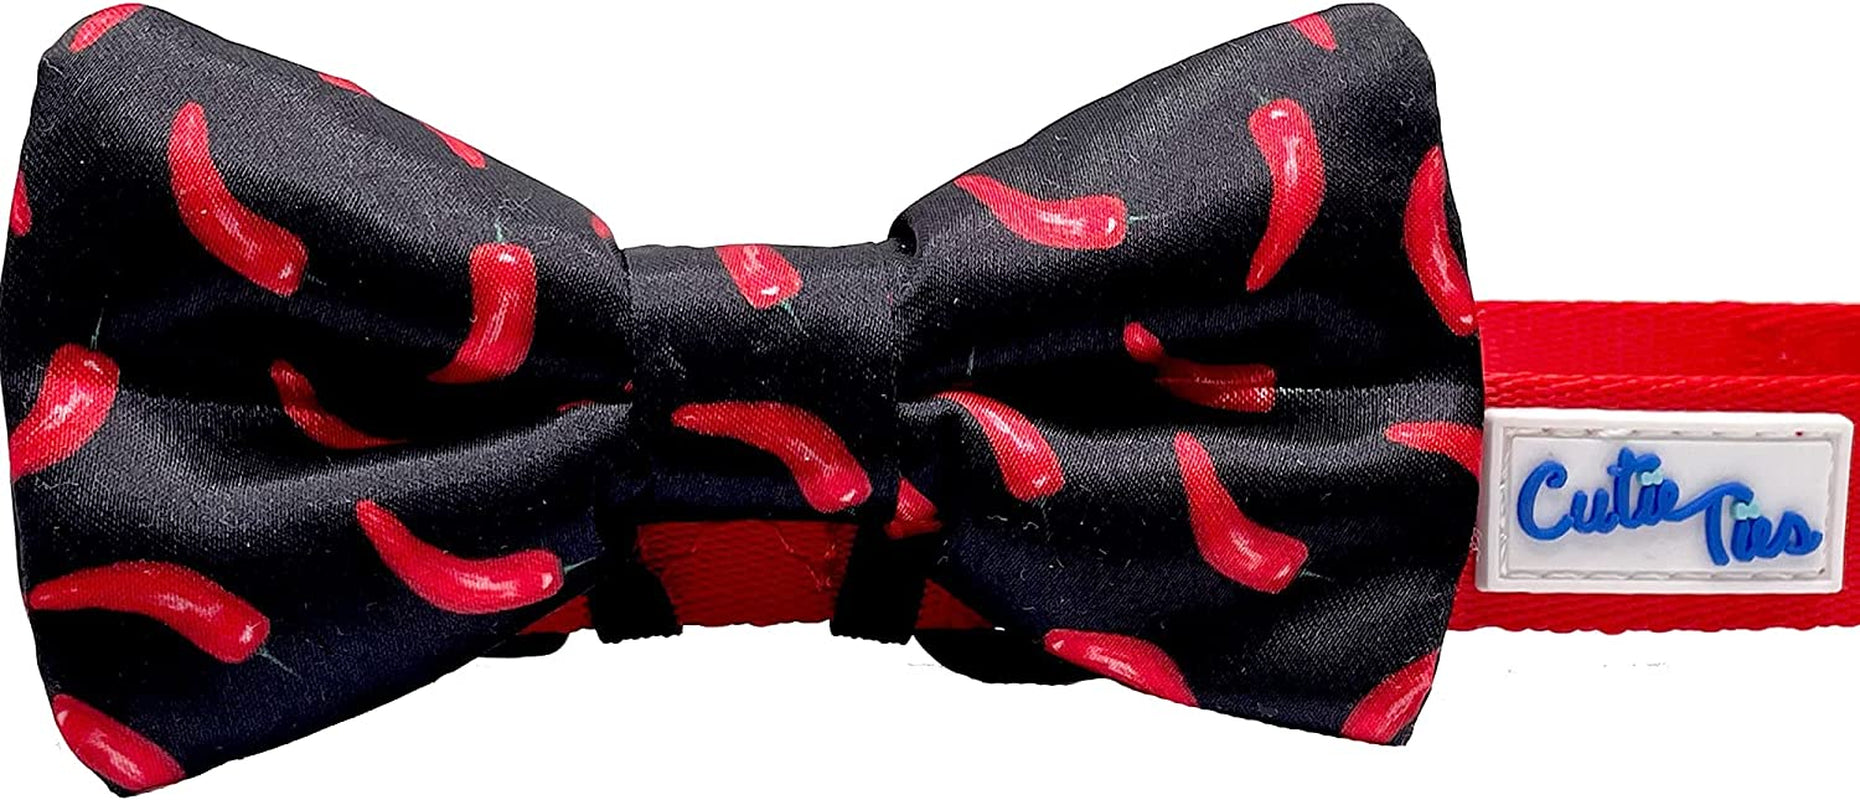 CUTIE TIES Dog Bow Tie Pizza- 2" X 4" Premium Quality Bow Ties for Dogs - Fancy Dog Tie with Slip over Elastic Bands - Cute Dog Tie Fits Most Collars - Dog Tie for Small, Medium and Large Breeds Animals & Pet Supplies > Pet Supplies > Dog Supplies > Dog Apparel Cutie Ties Chili Peppers  